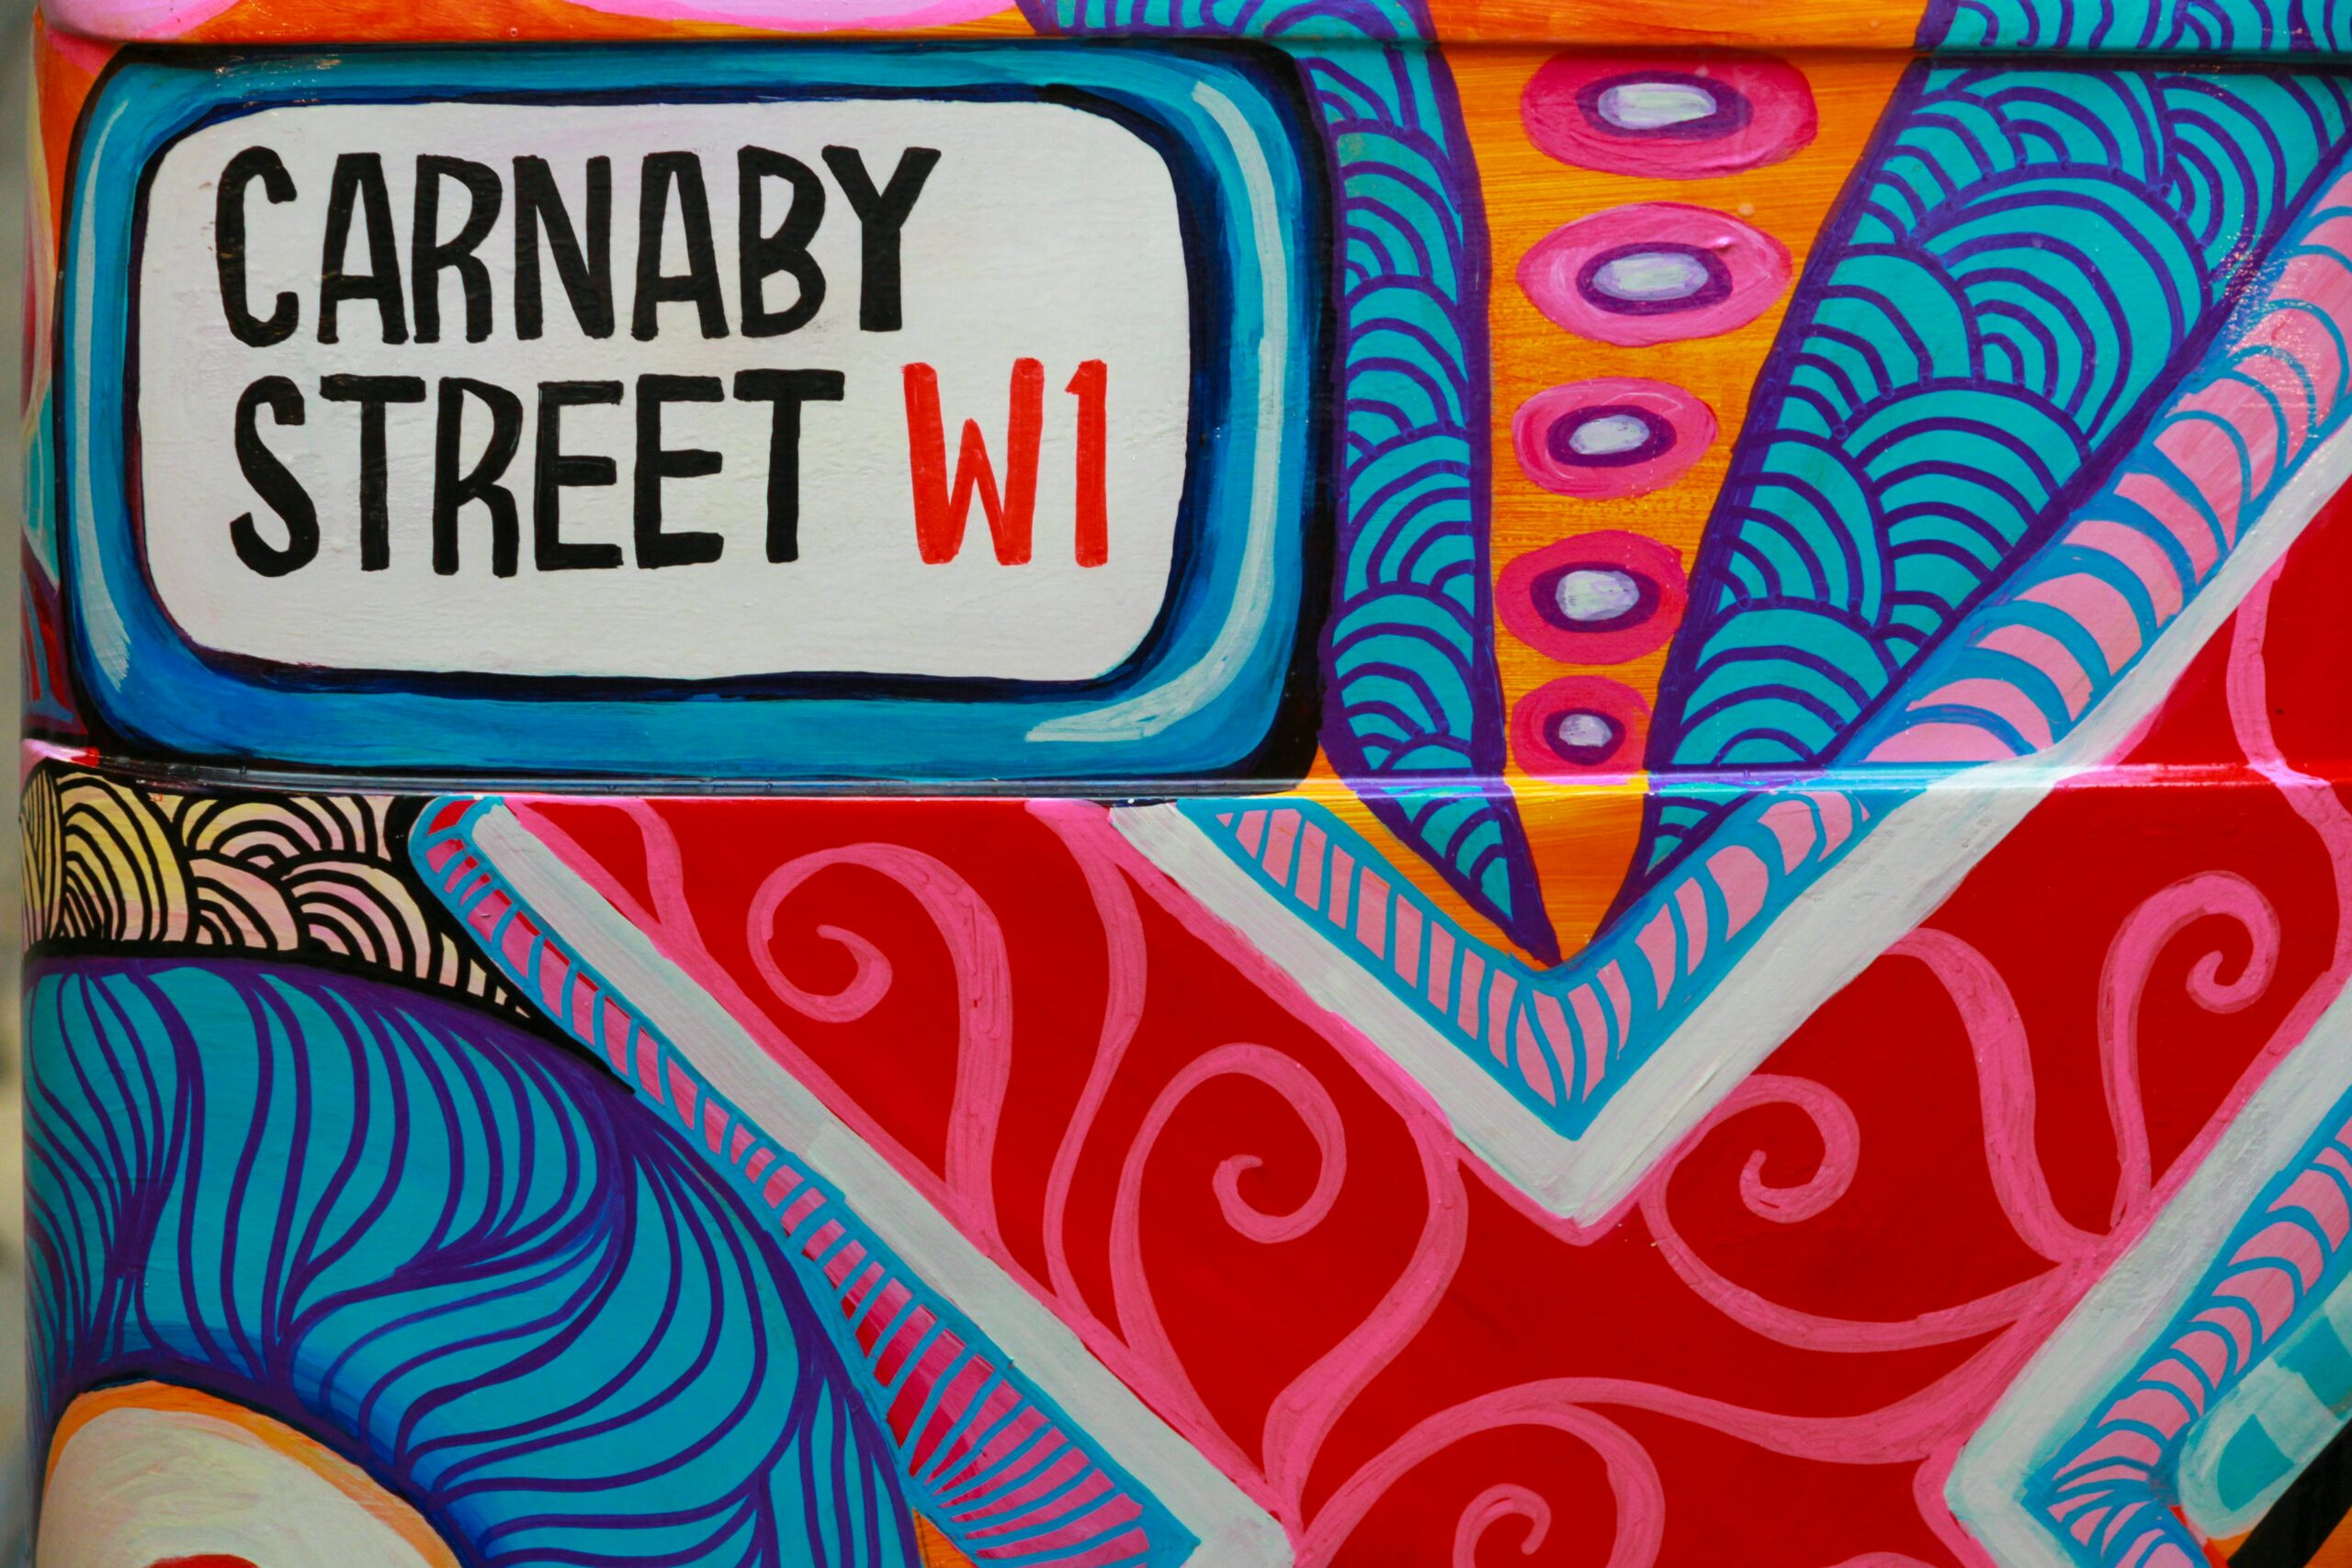 Carnaby Street sign